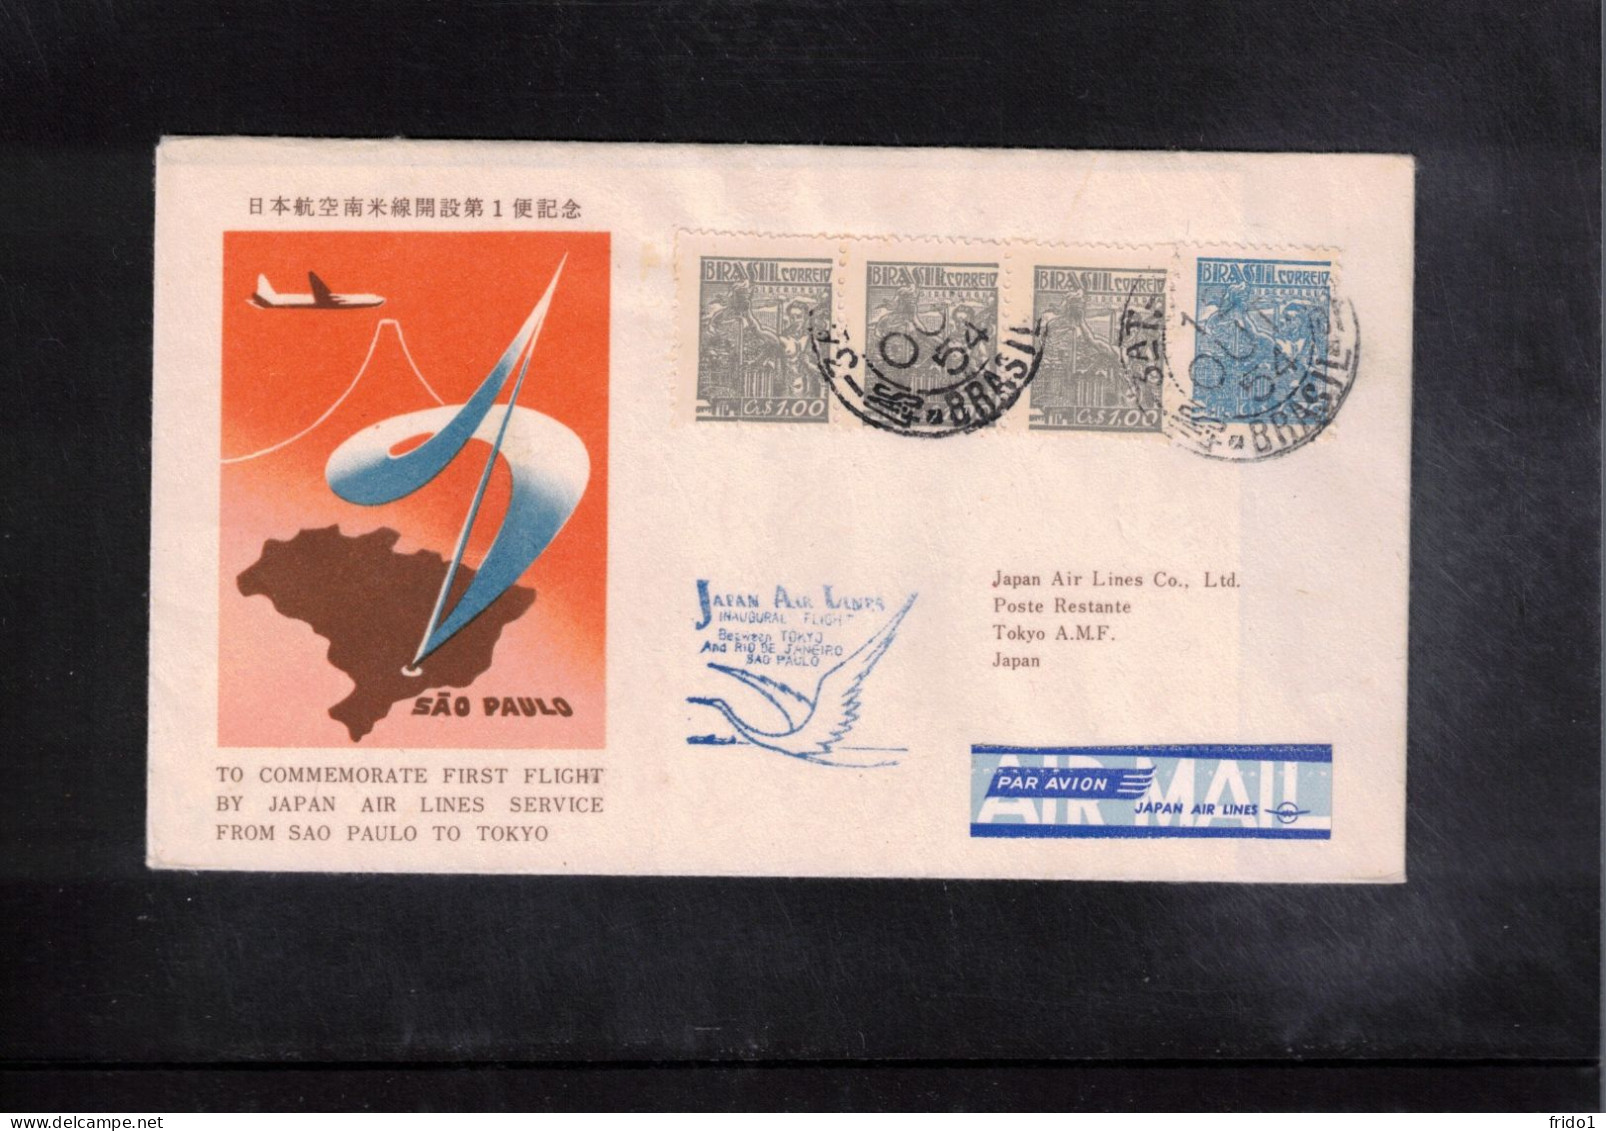 Brazil 1954 Japan Air Lines First Flight Sao Paulo - Tokyo - Covers & Documents